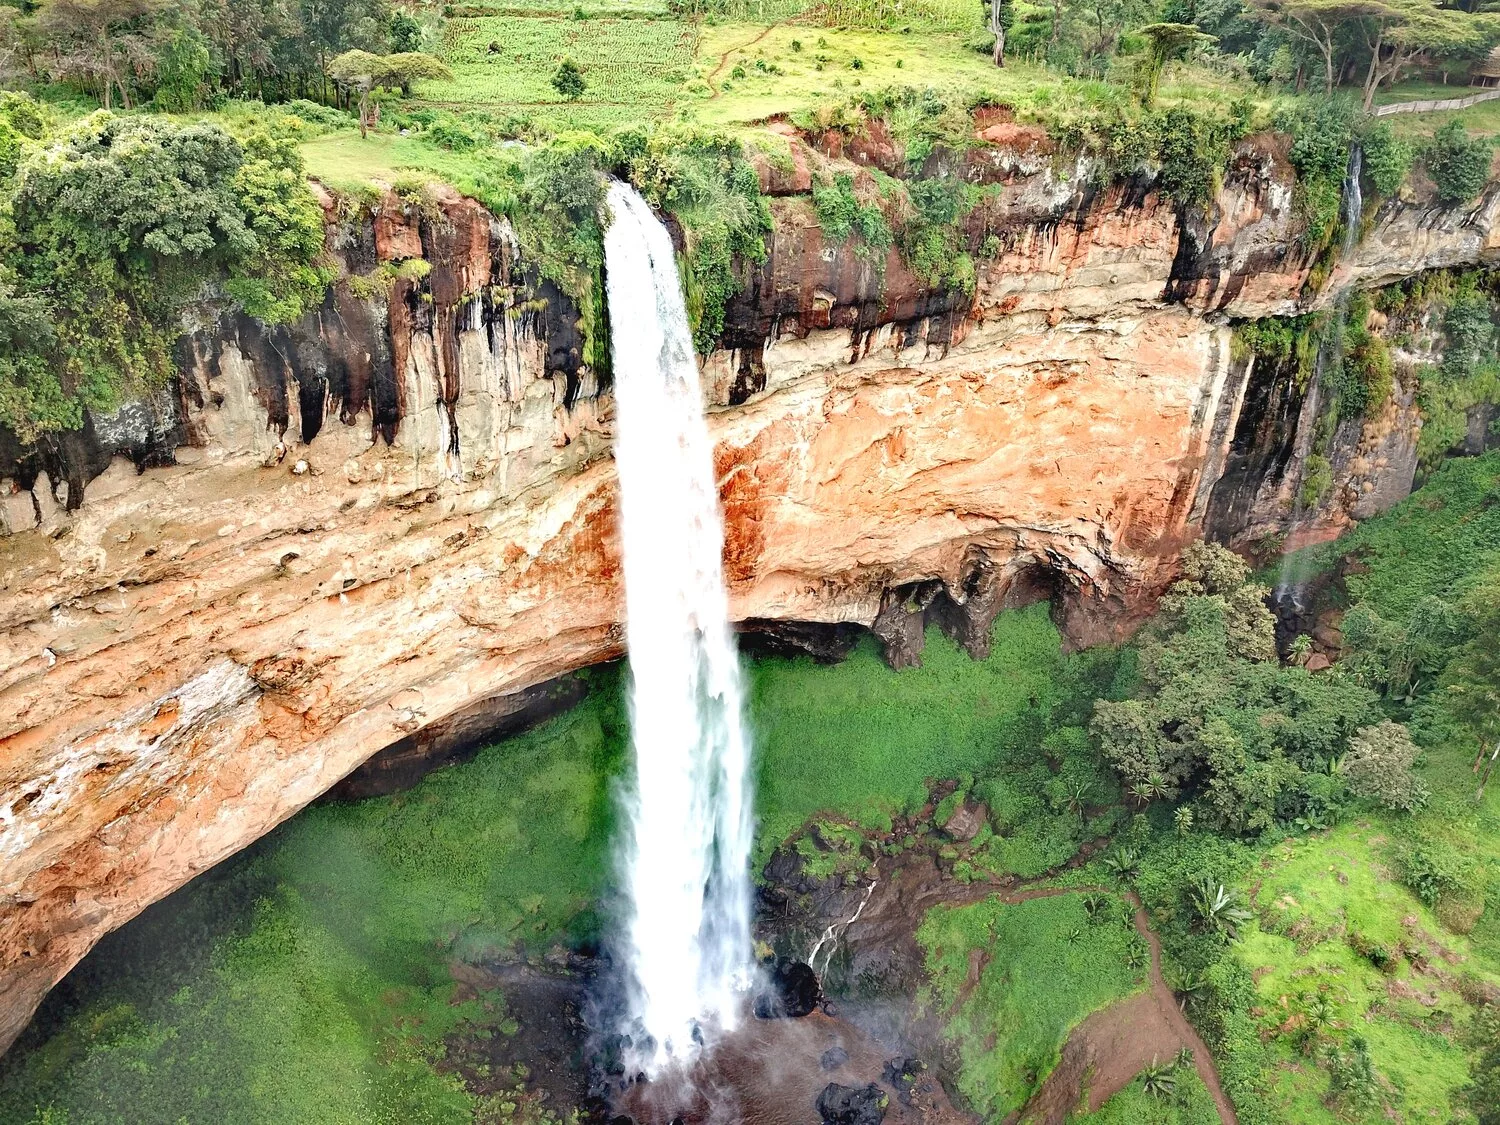 About Sipi Falls